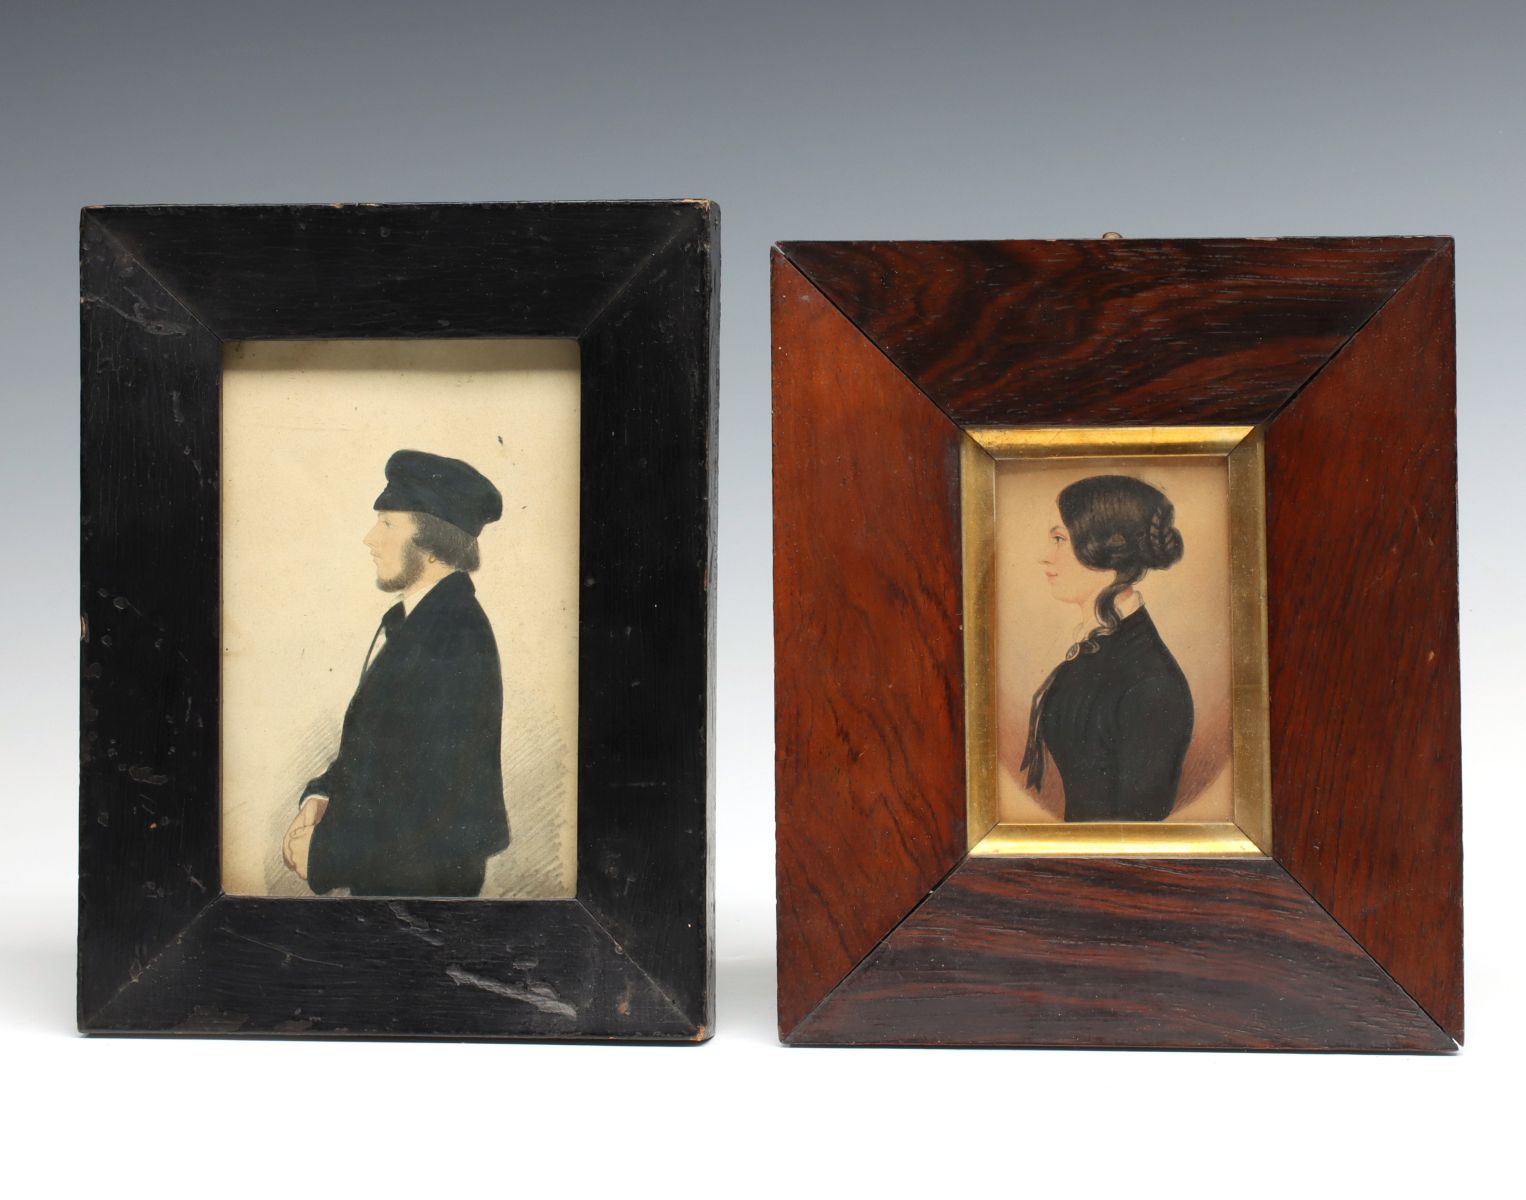 EARLY 19TH C. WATERCOLOR ON PAPER MINIATURE PORTRAITS